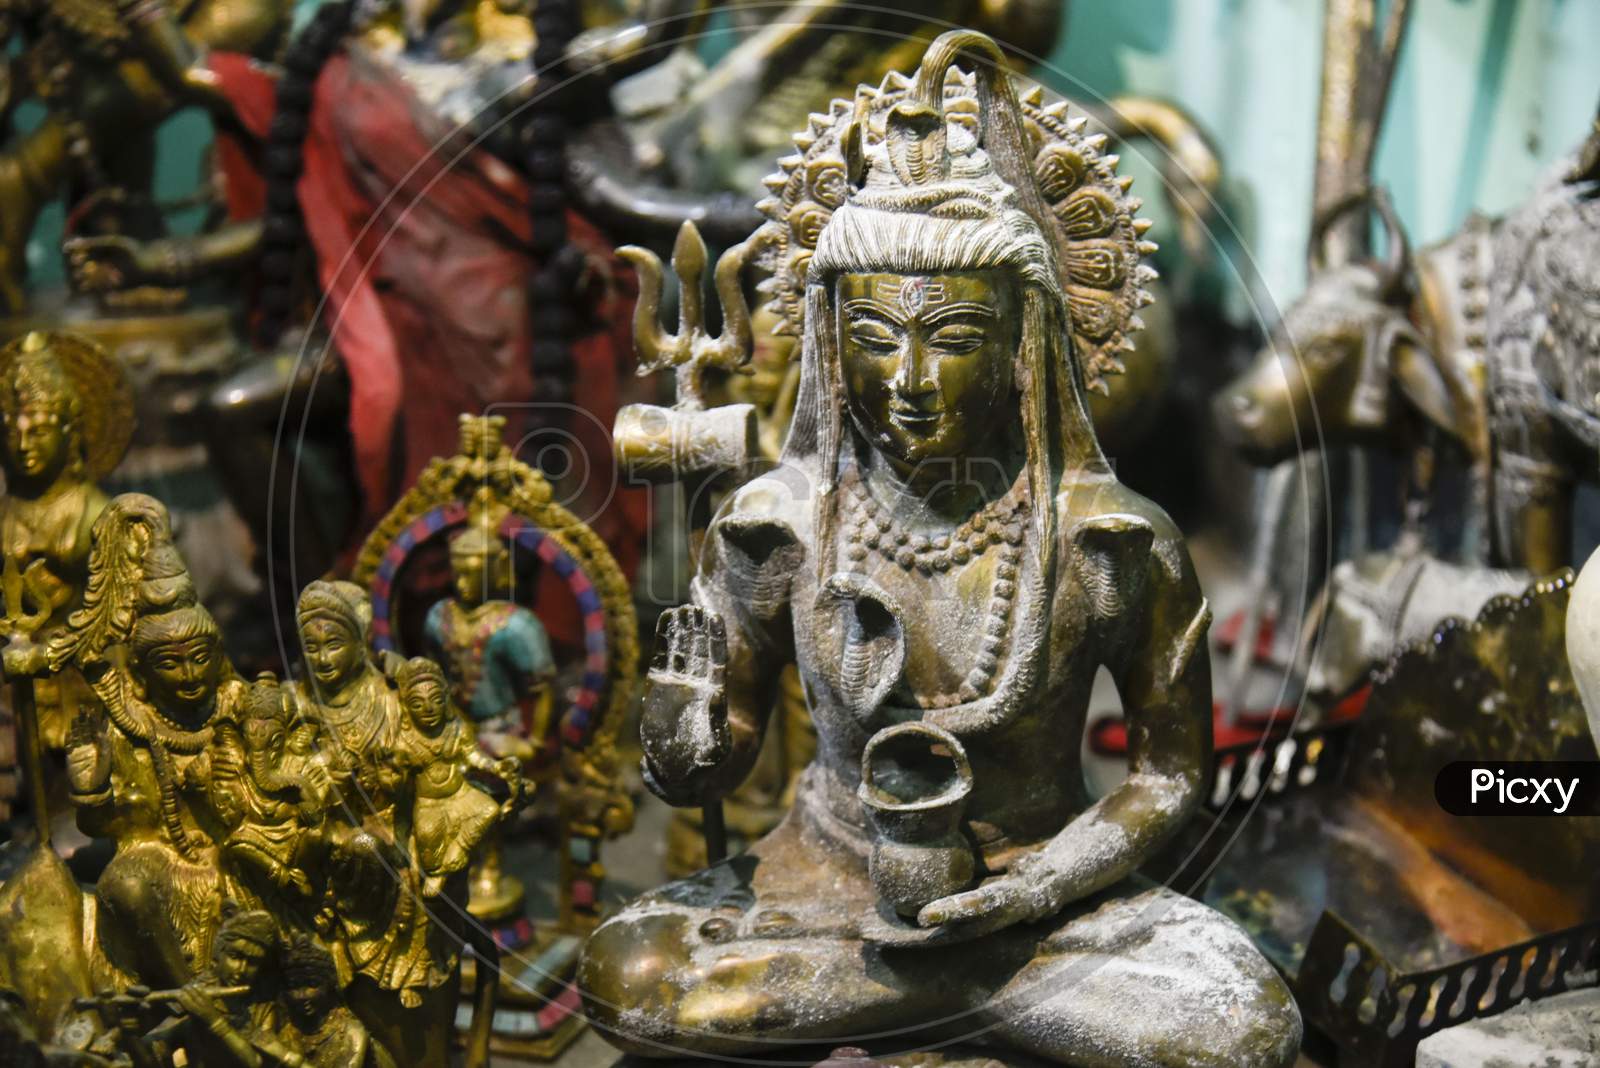 Antique Idols Of Gods And Goddesses Recovered By Police From The River Brahmaputra, In Guwahati